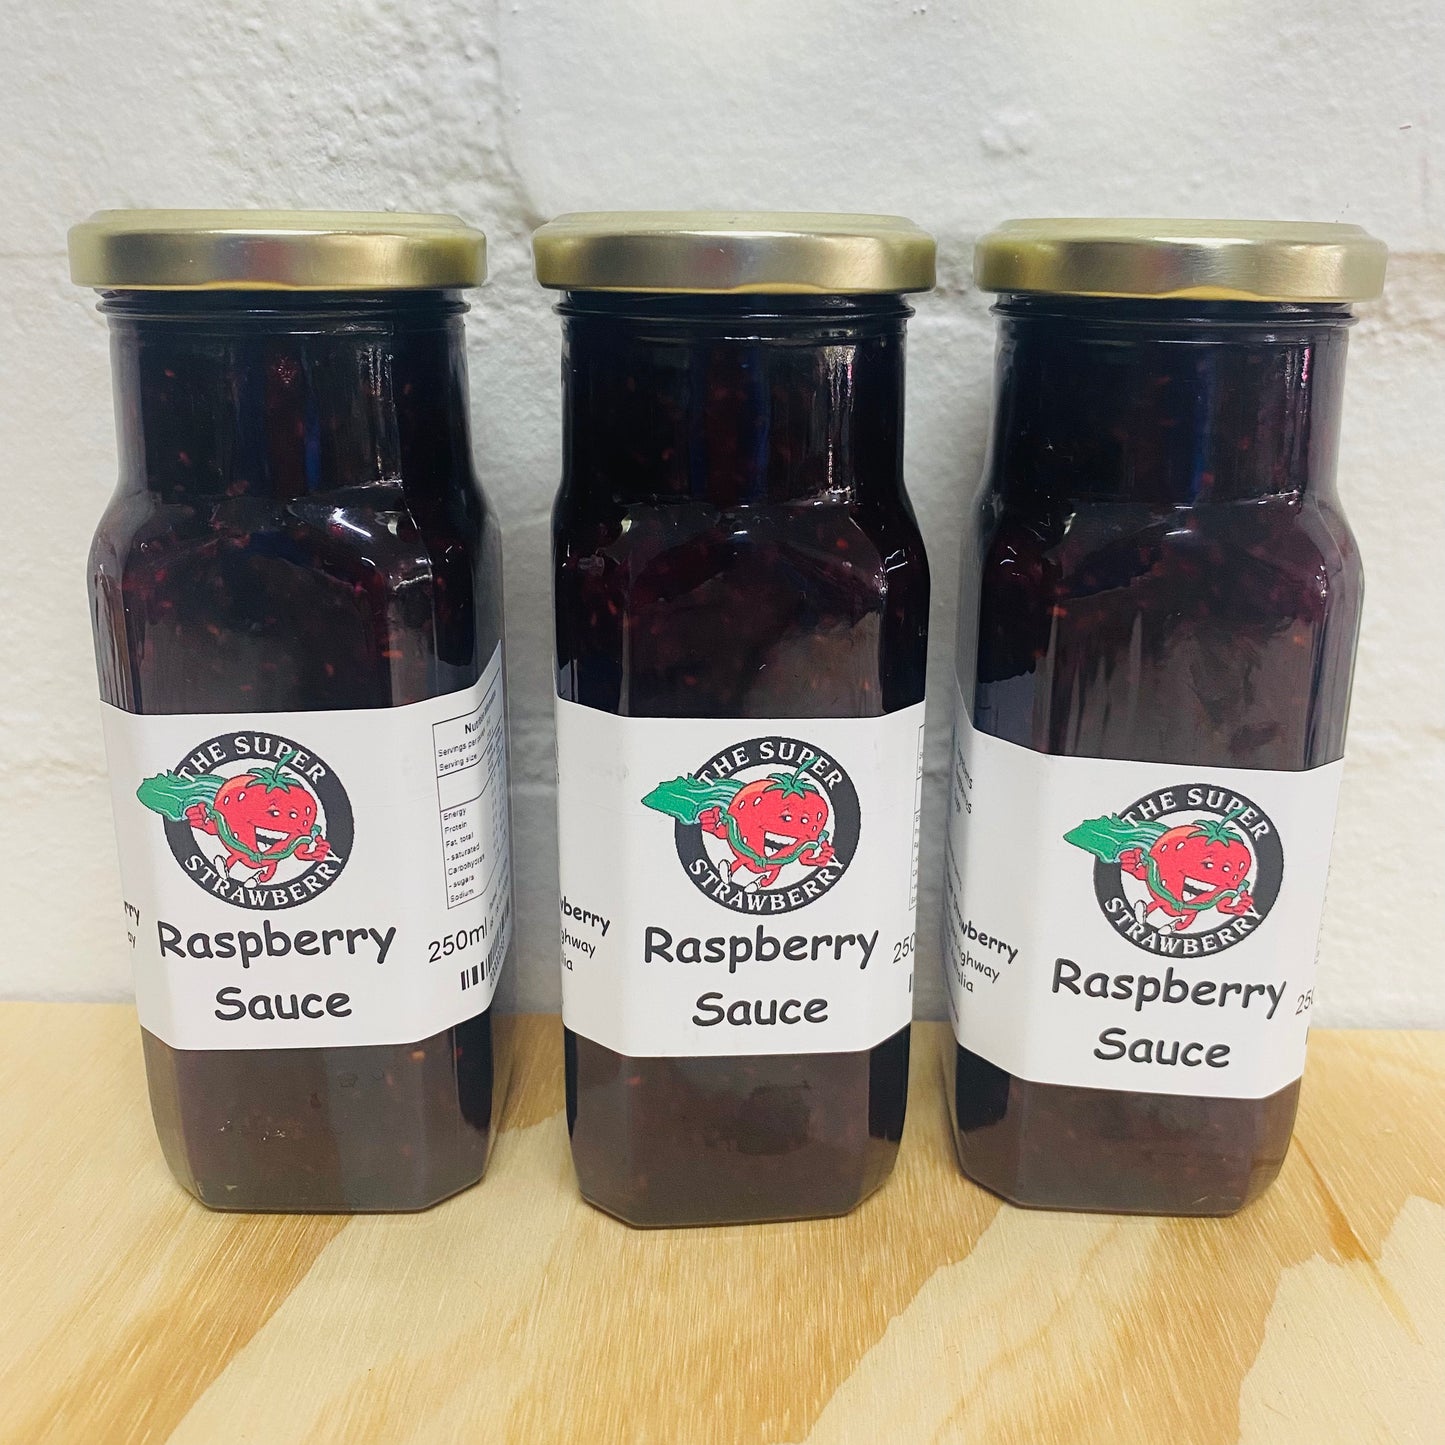 Raspberry Sauce by The Super Strawberry